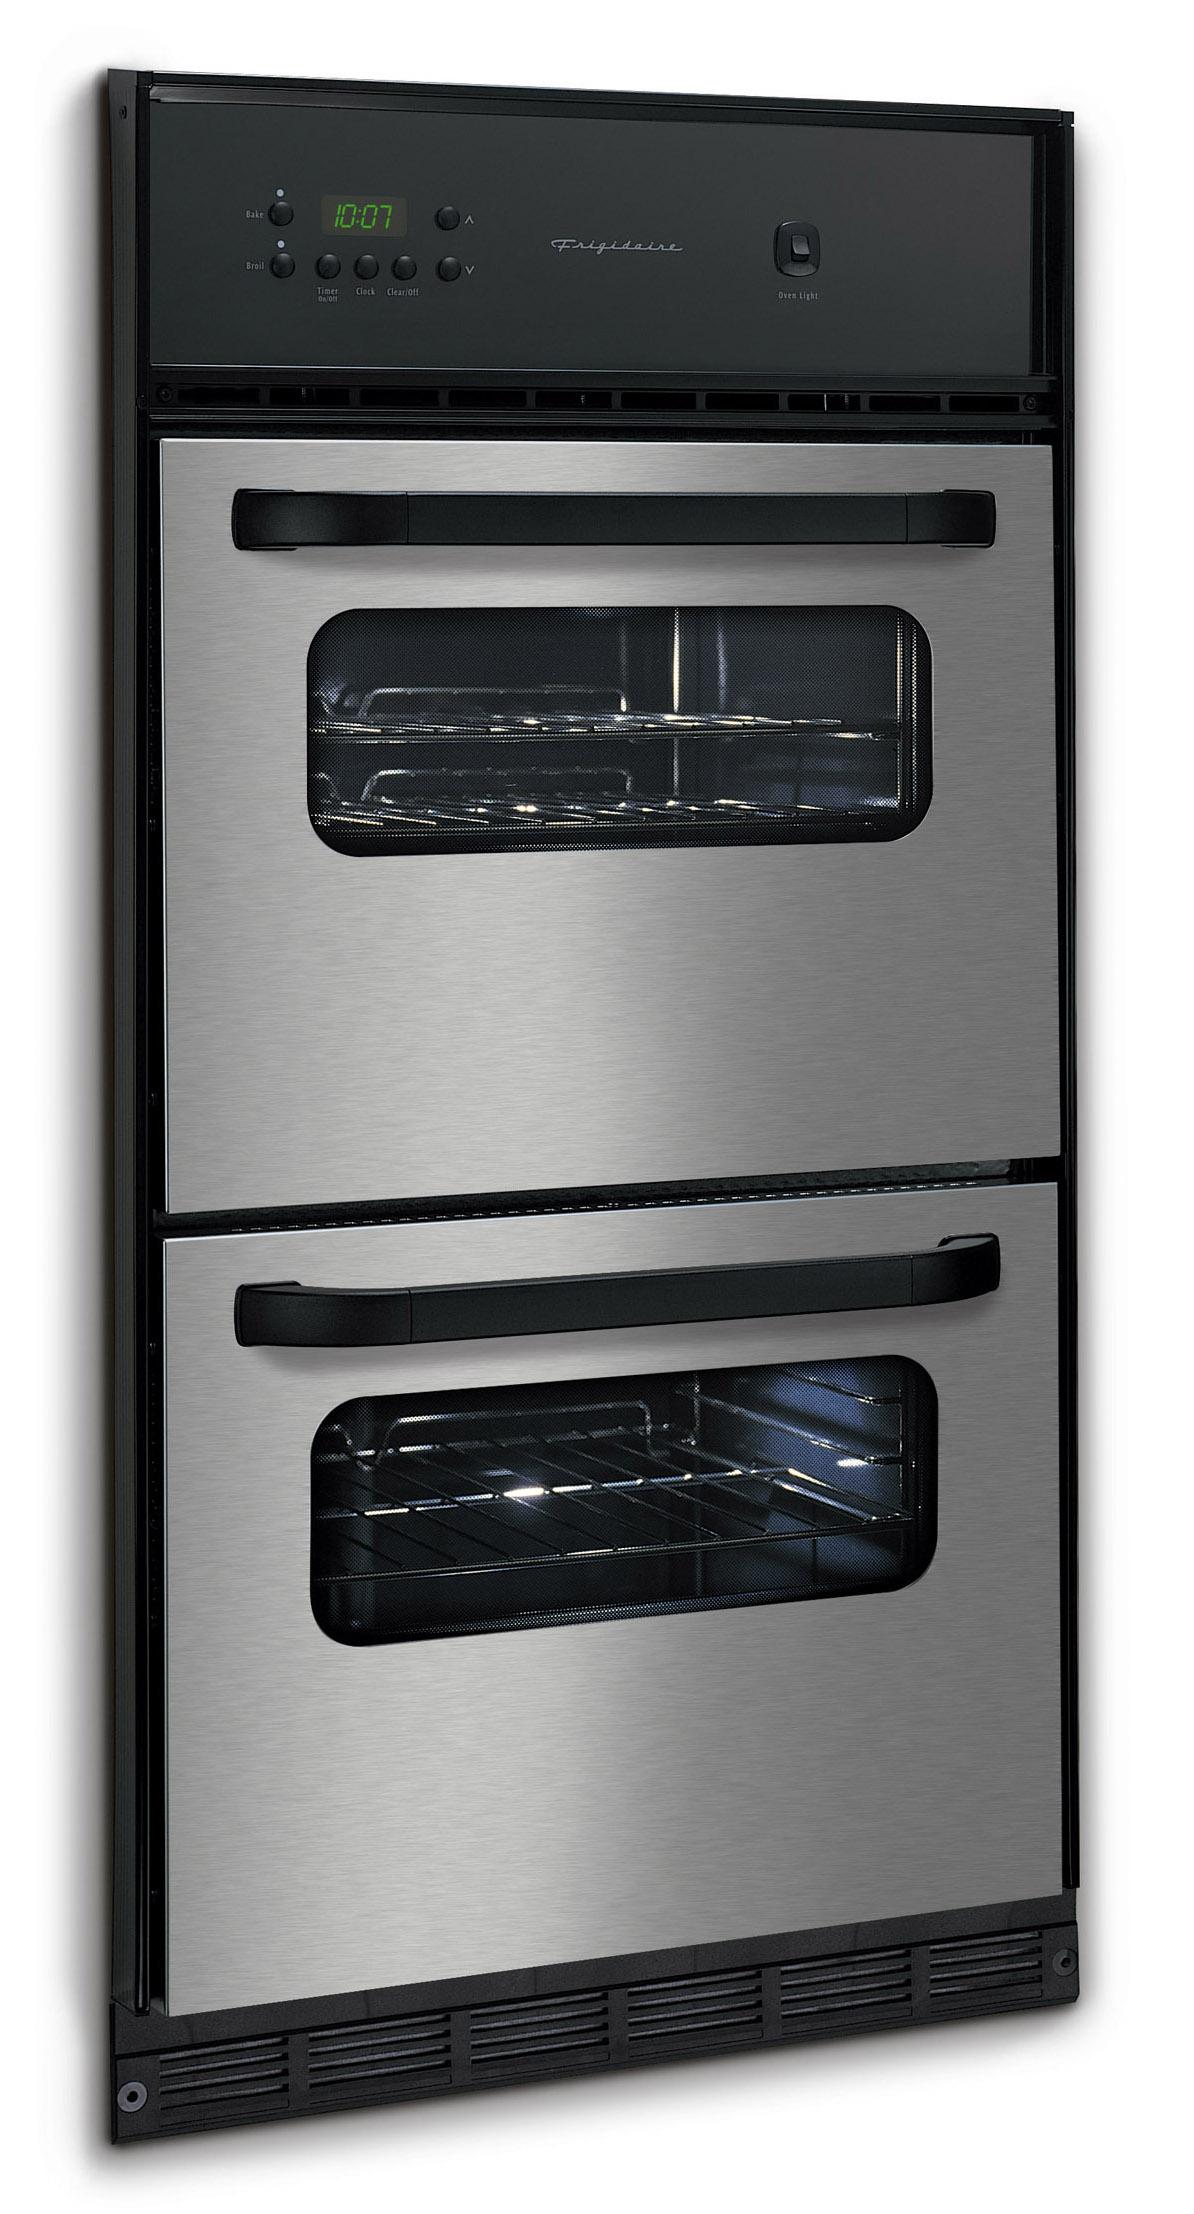 Frigidaire FGB24T3EC 24" Single Gas Wall Oven with 2.7 cu. ft. Oven